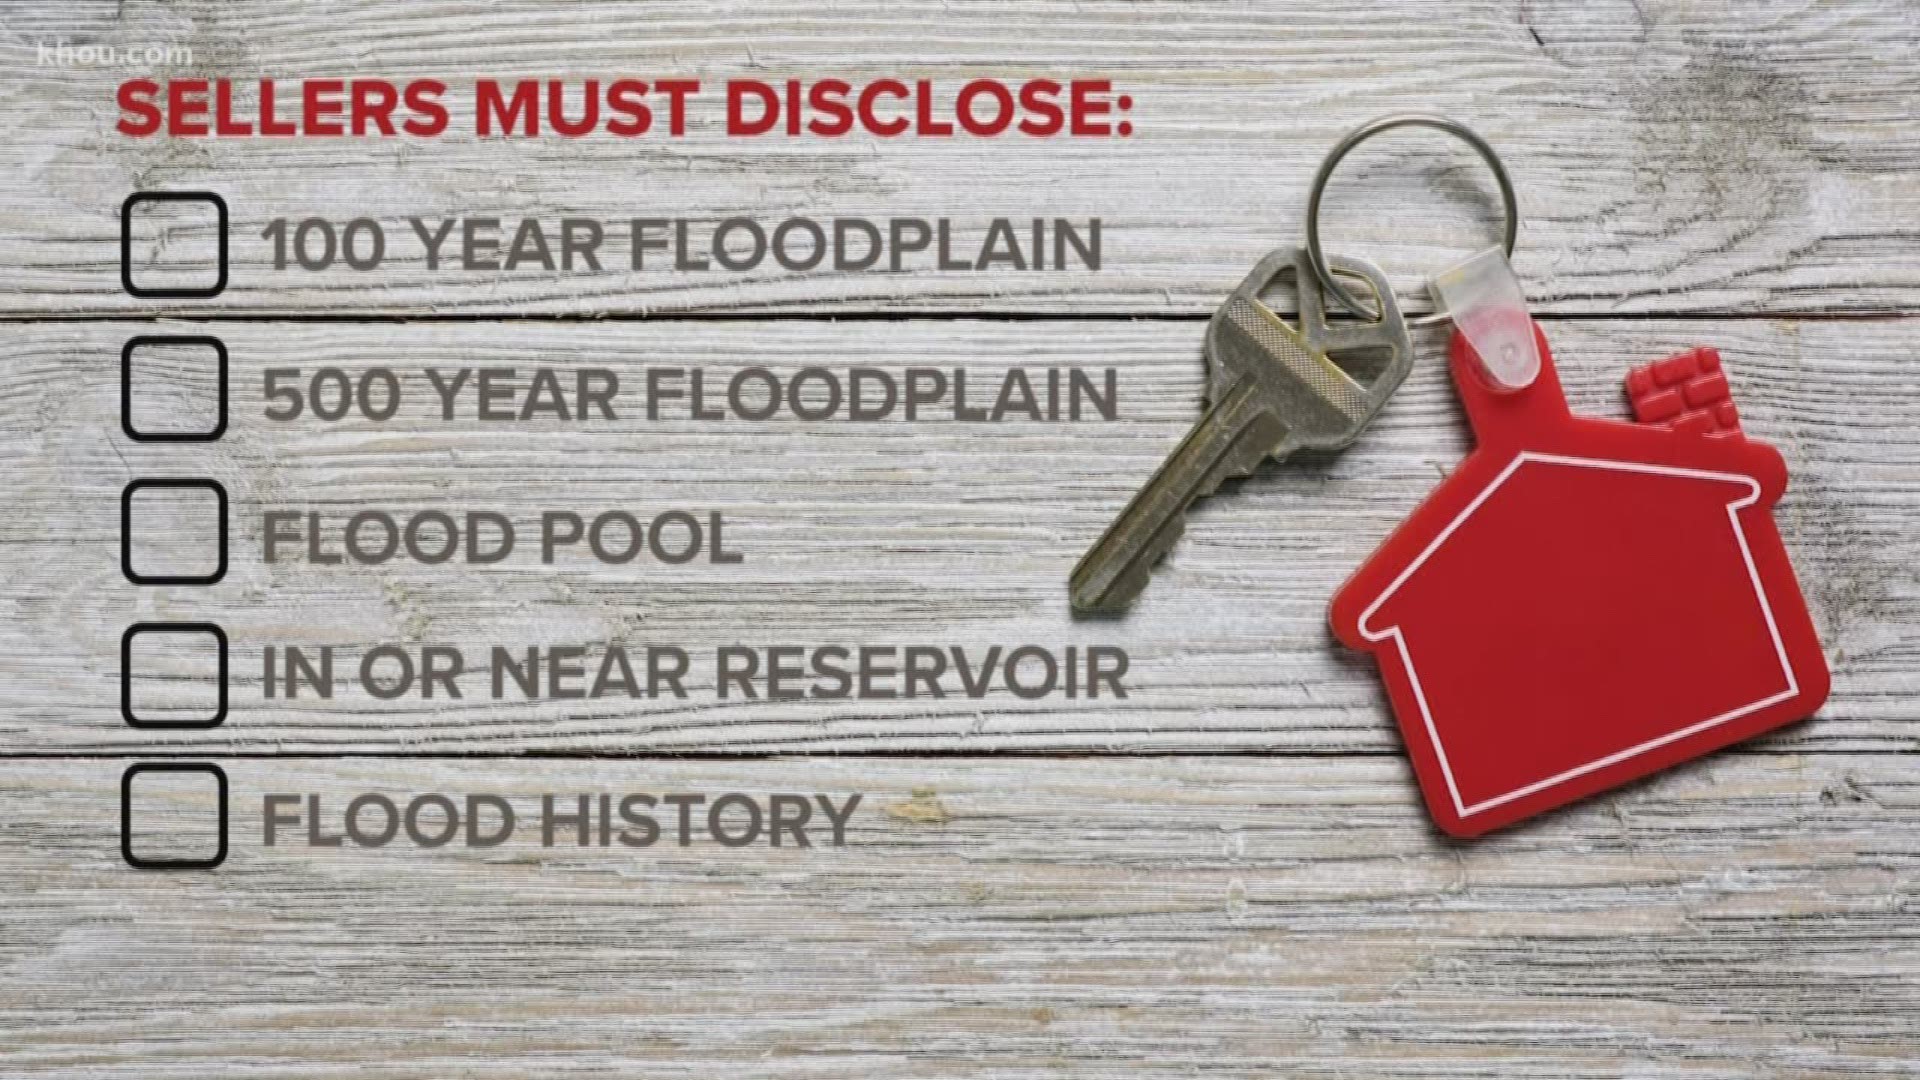 Starting Sept. 1, sellers in Texas have to make sure home buyers and owners know a home's flood risk before moving in.